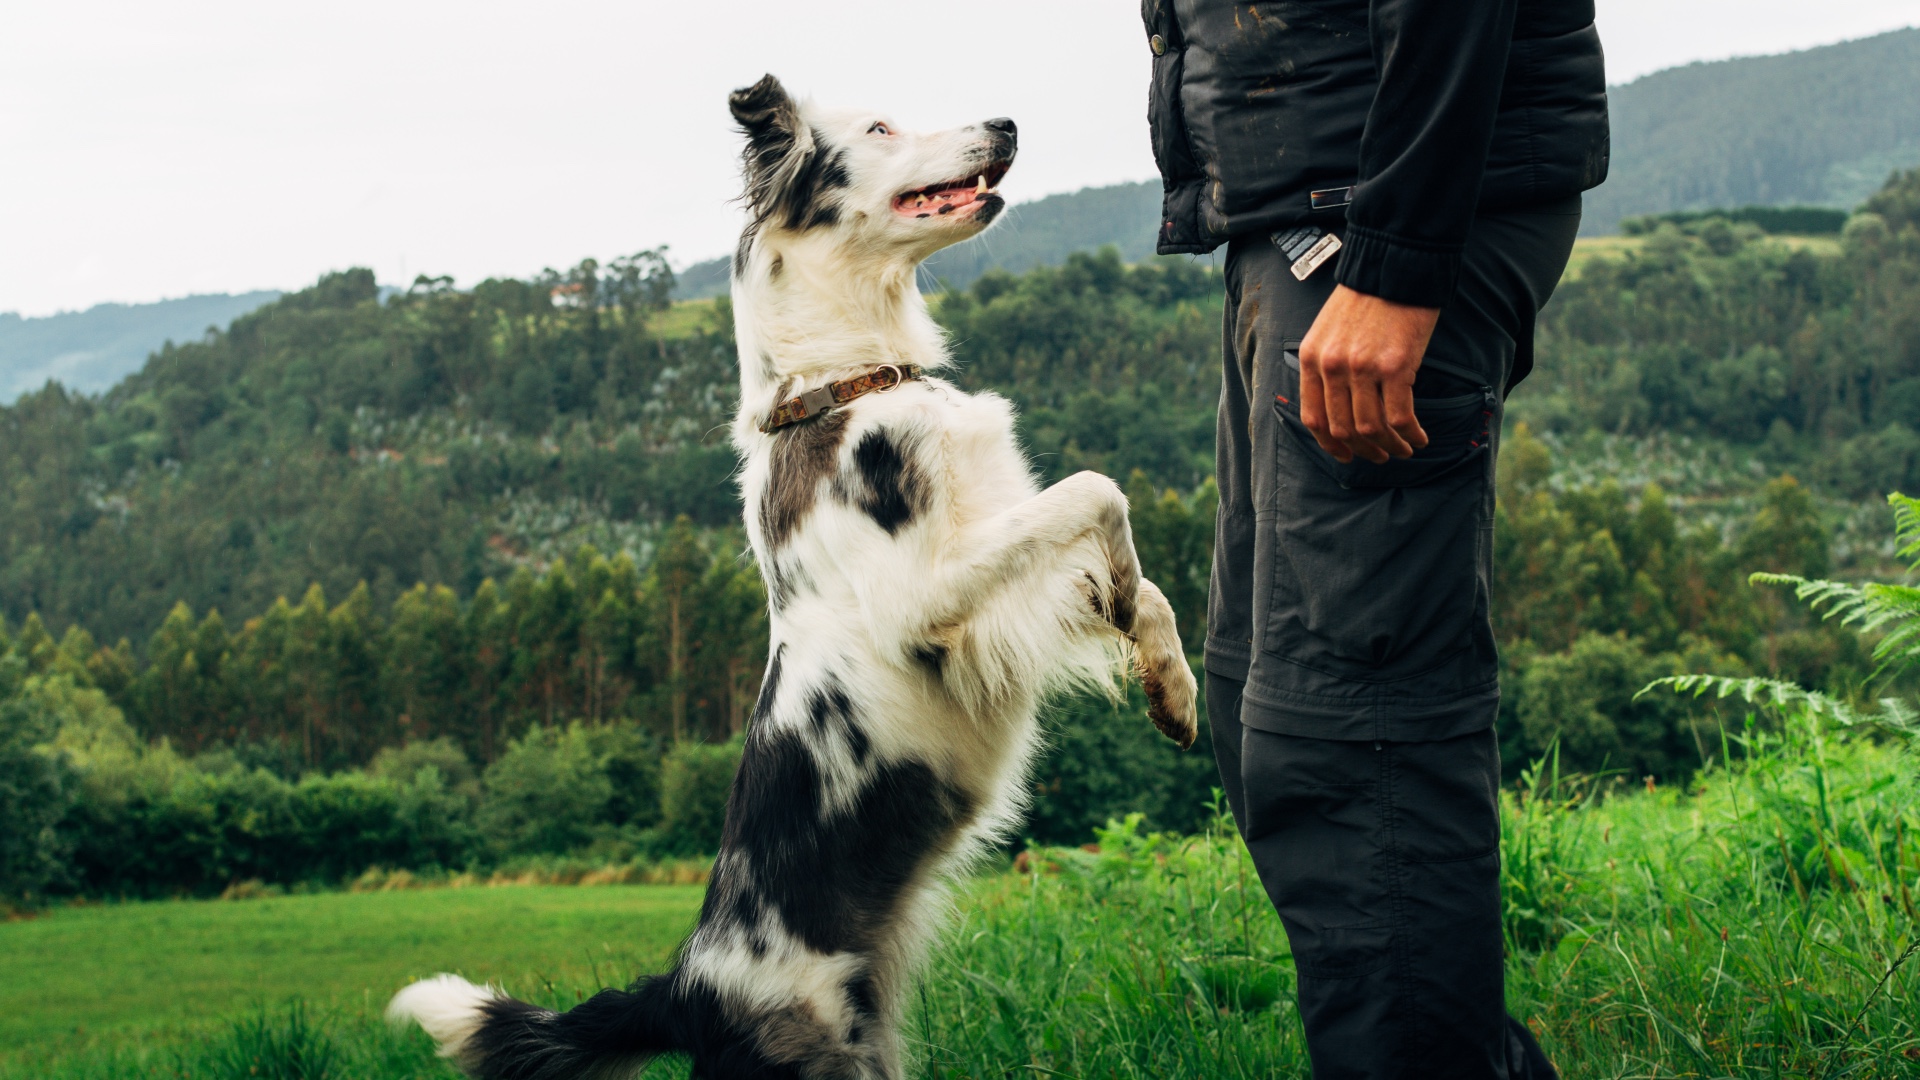 Trainer explains why it’s important take things slowly when training your dog